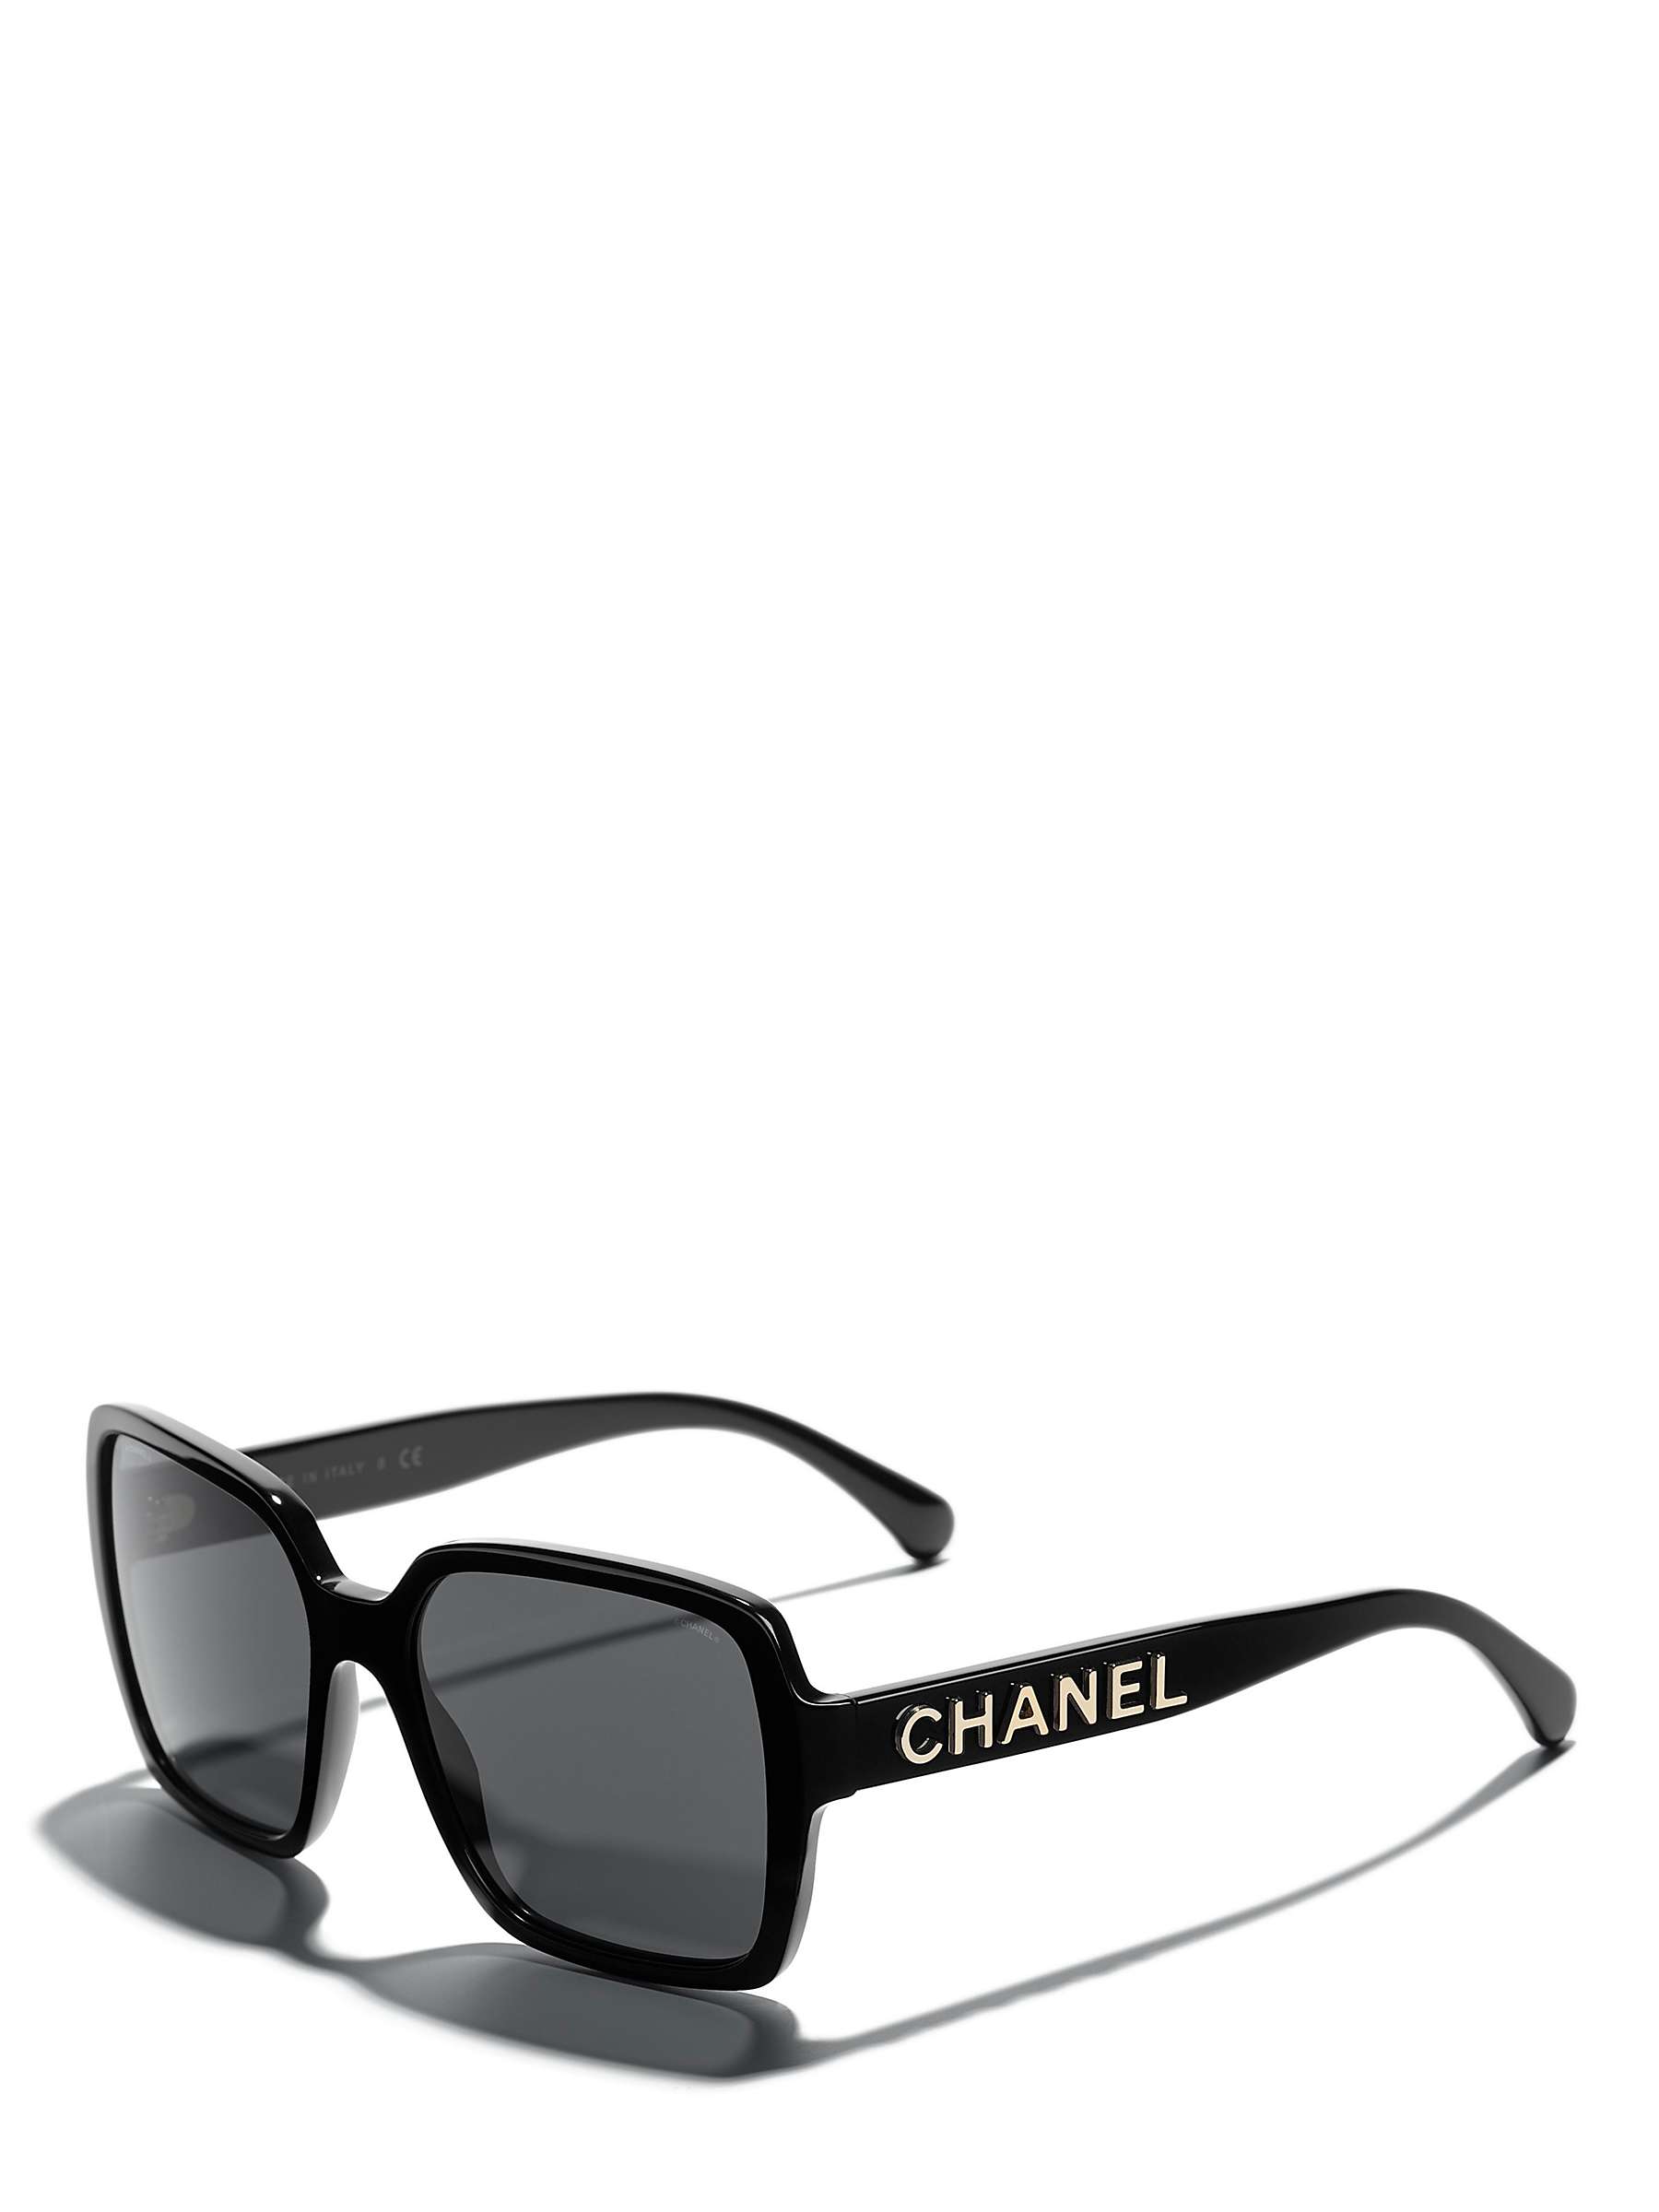 Buy CHANEL Pillow Sunglasses CH5408, Black Online at johnlewis.com